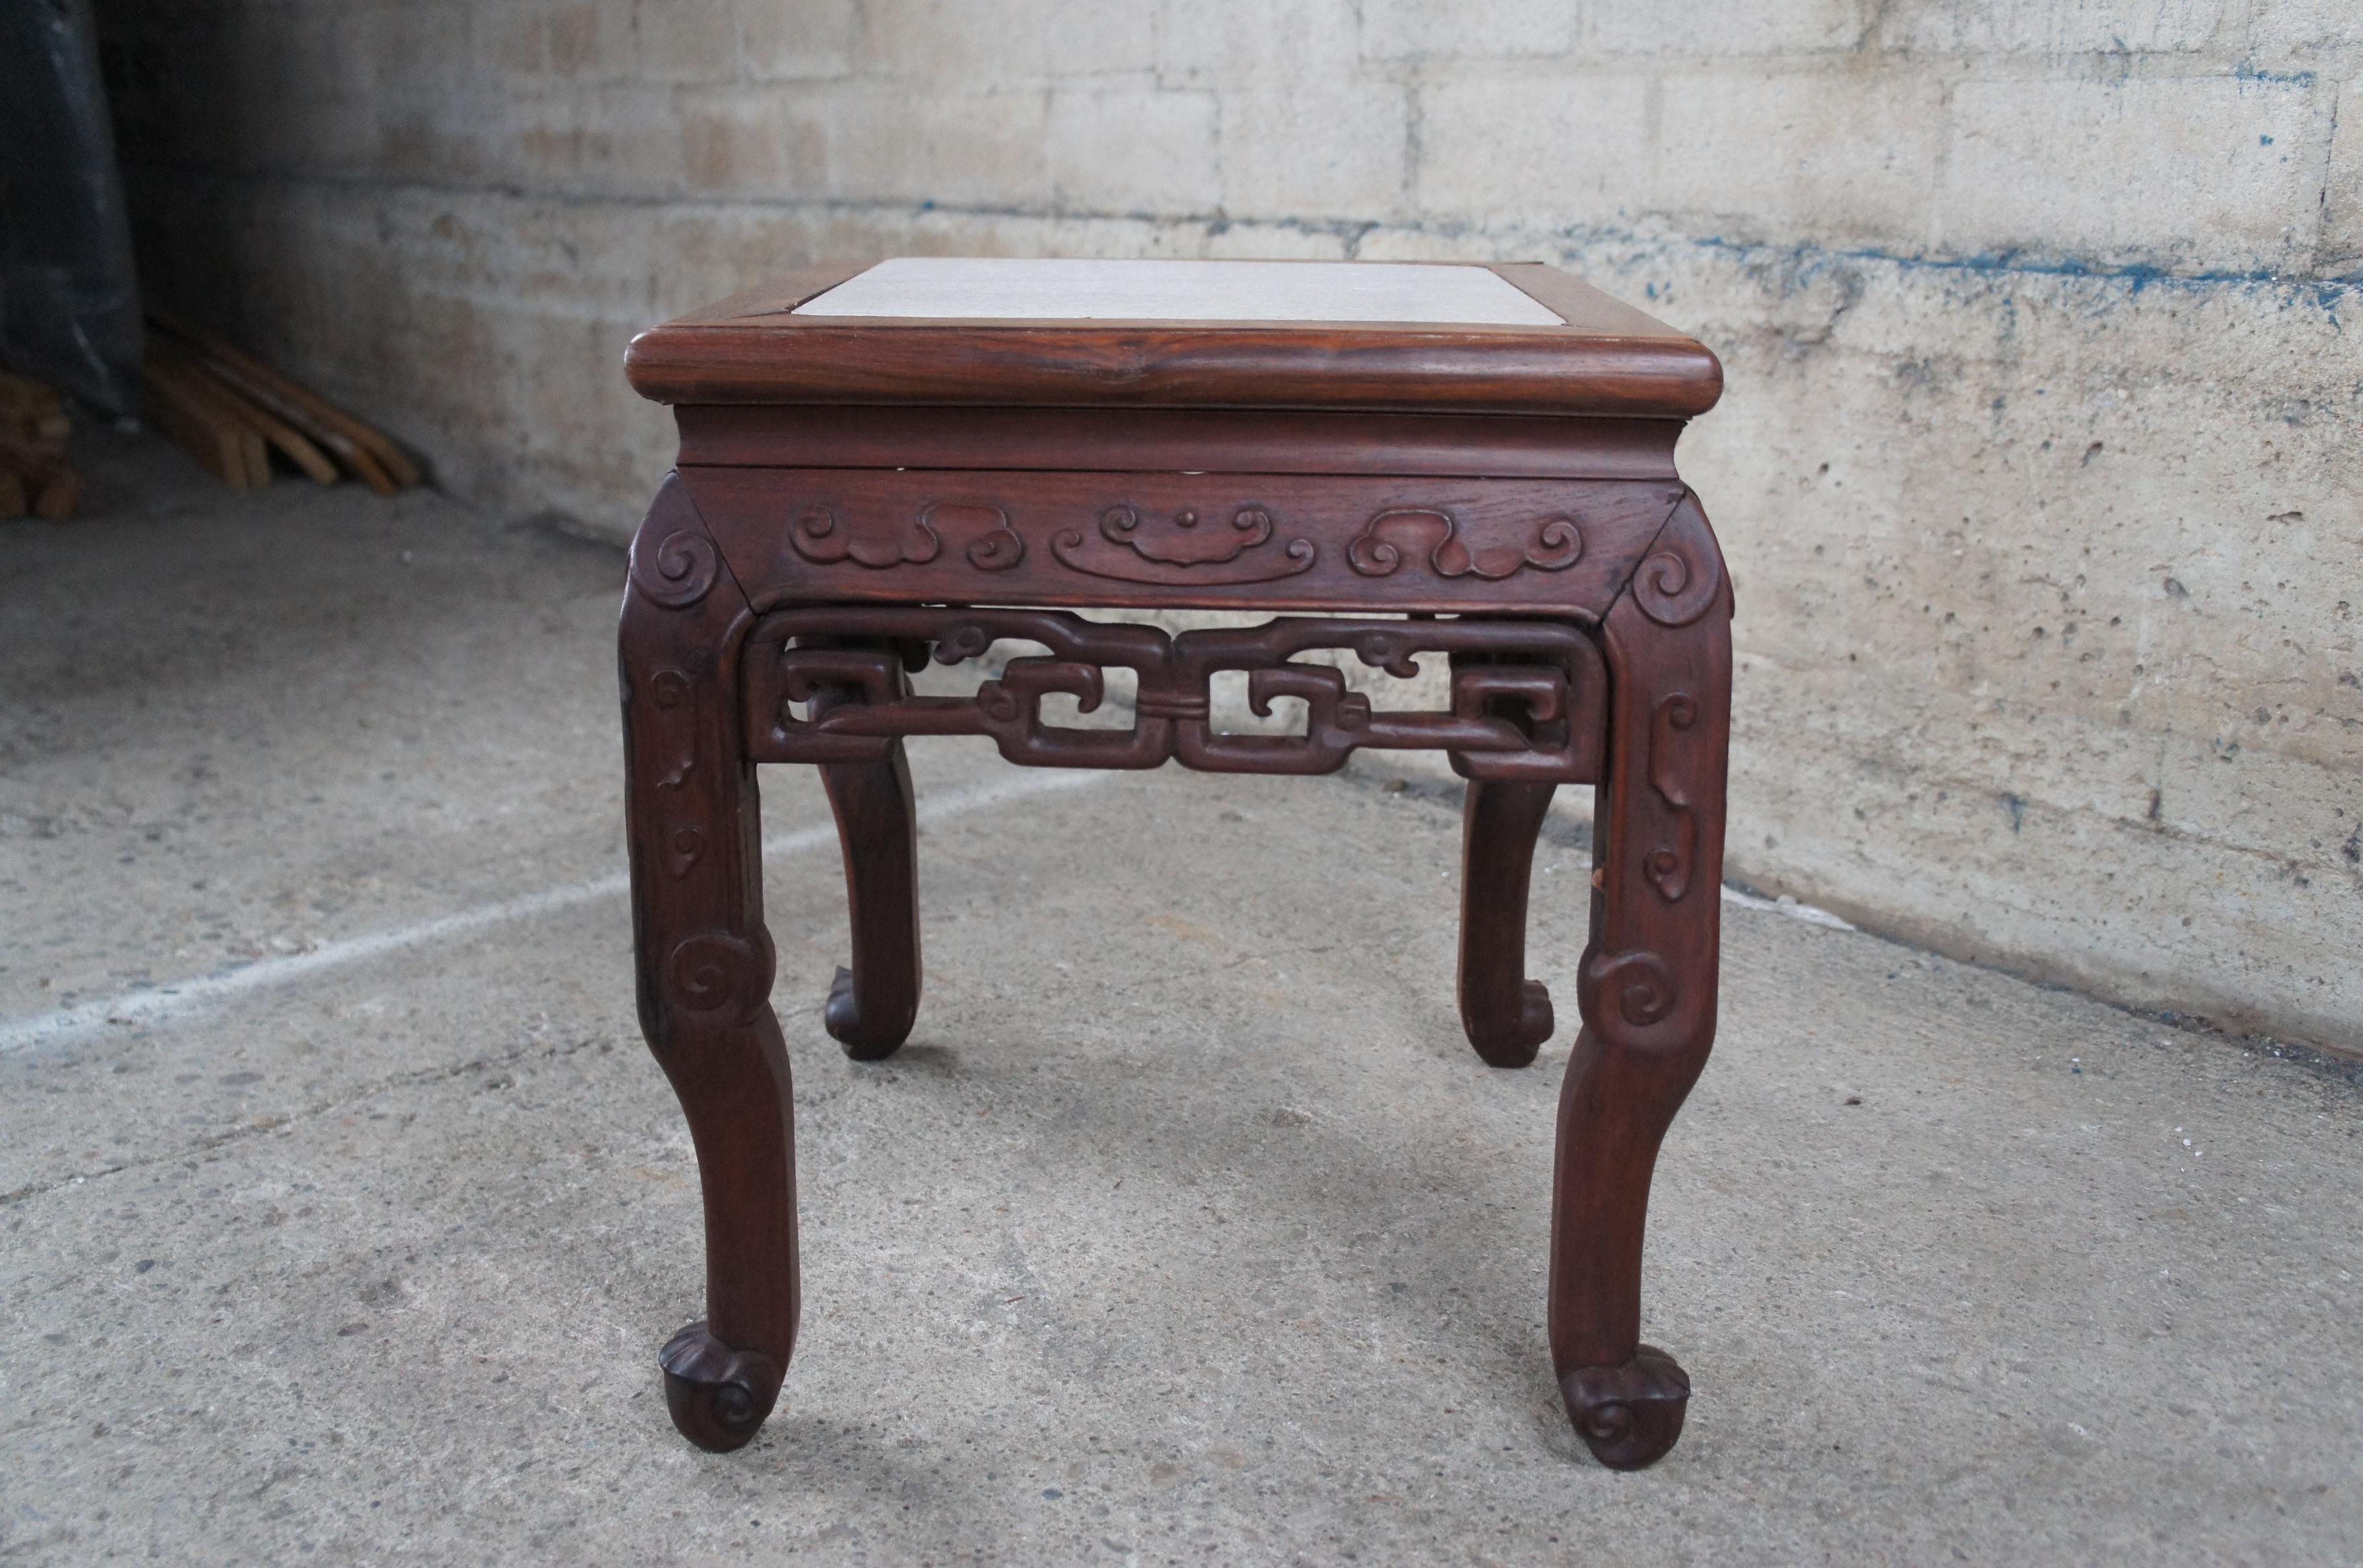 Antique Chinese Rosewood Carved Marble Top Side Table Stool Plant Stand Pedestal For Sale 4